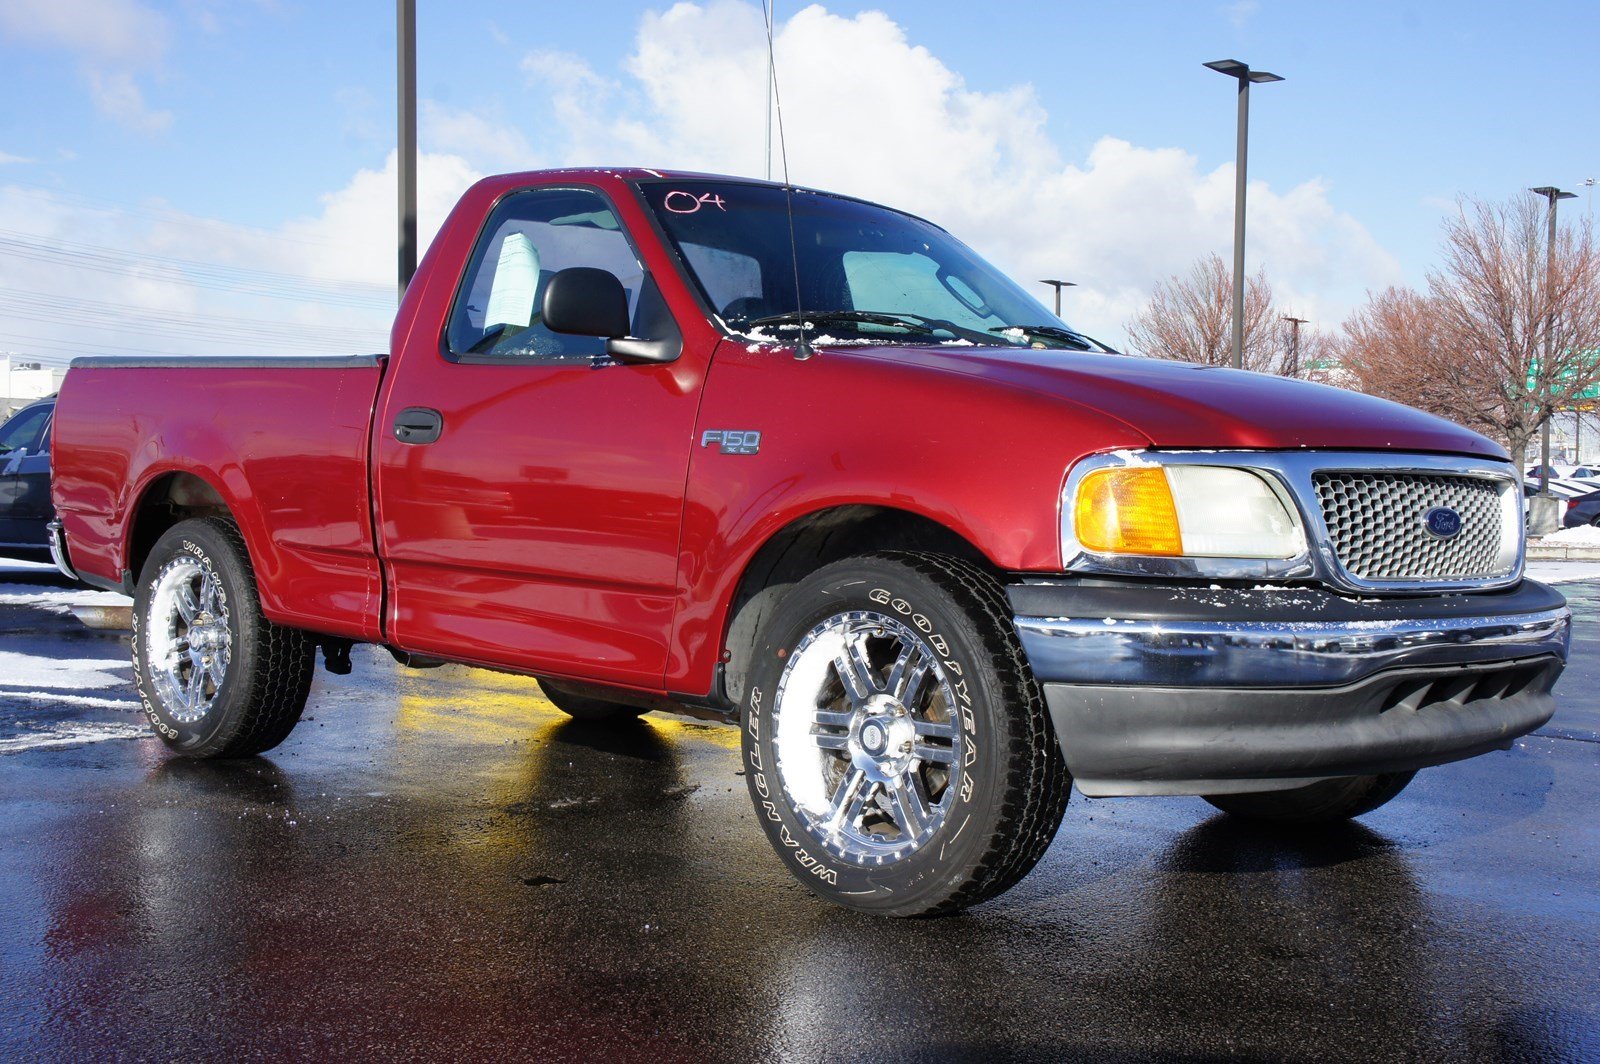 Pre-Owned 2004 Ford F-150 Heritage XL Heritage Regular Cab Pickup in